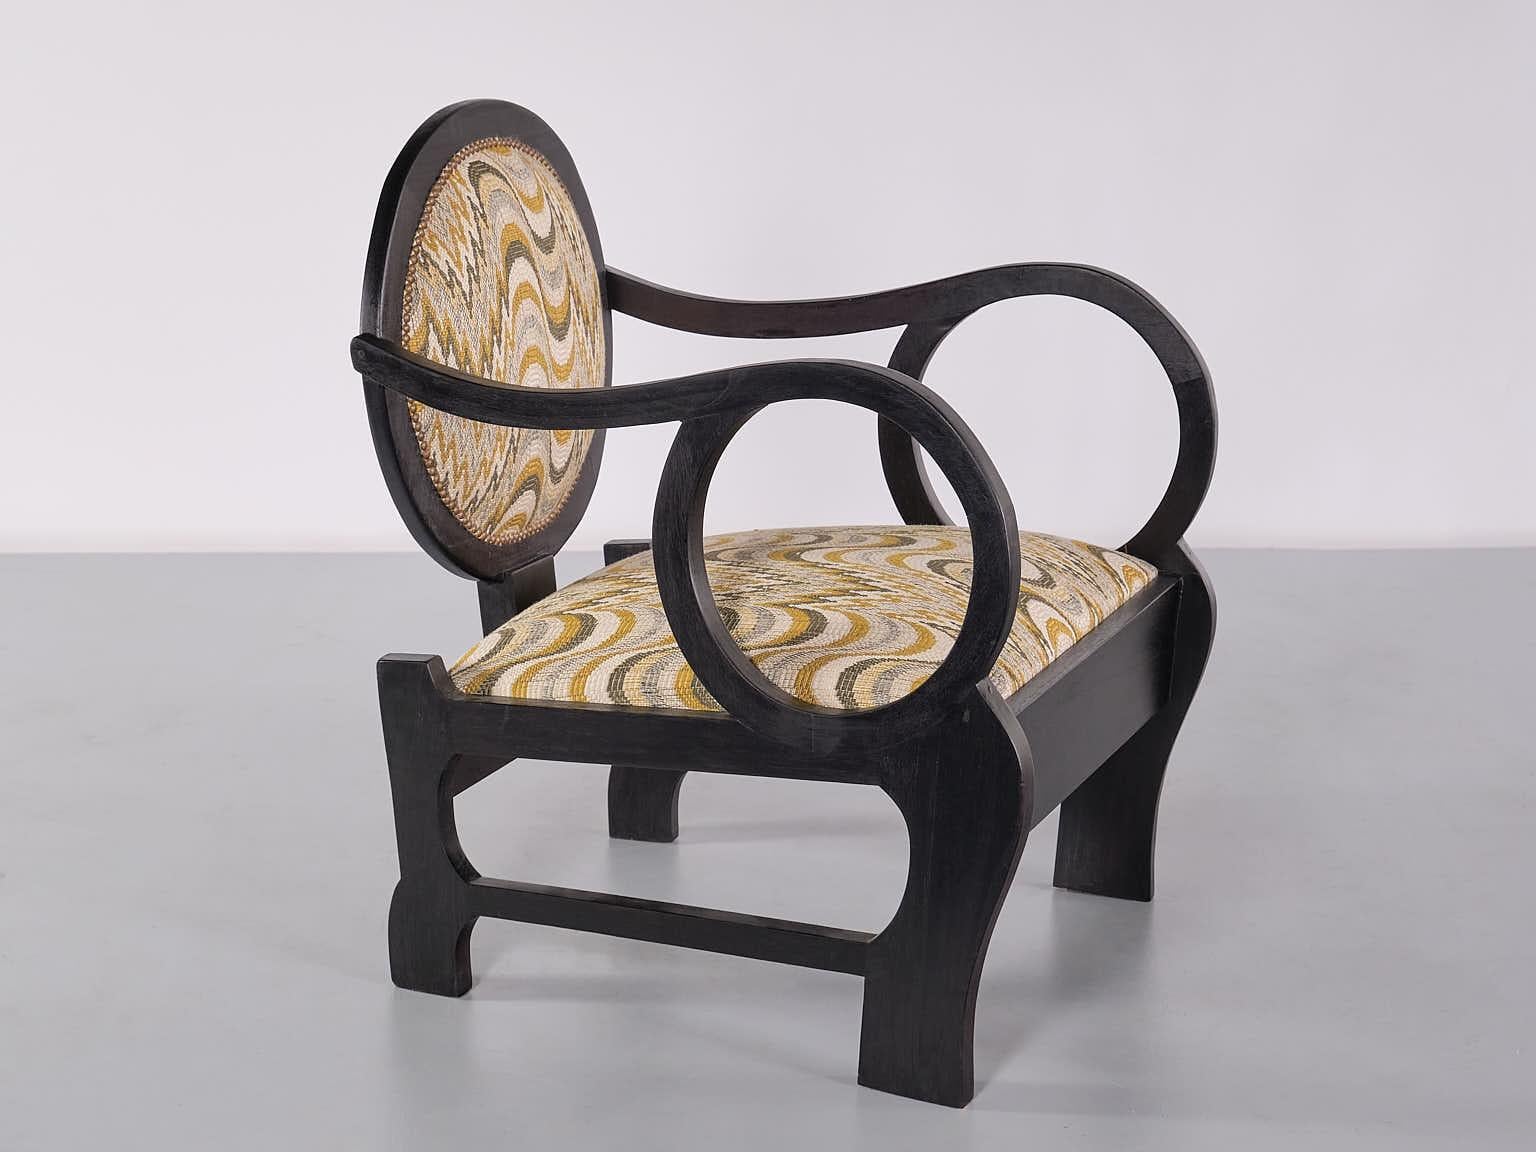 Pair of Lajos Kozma Attributed Armchairs in Oak and Dedar Jacquard, Late 1940s For Sale 2